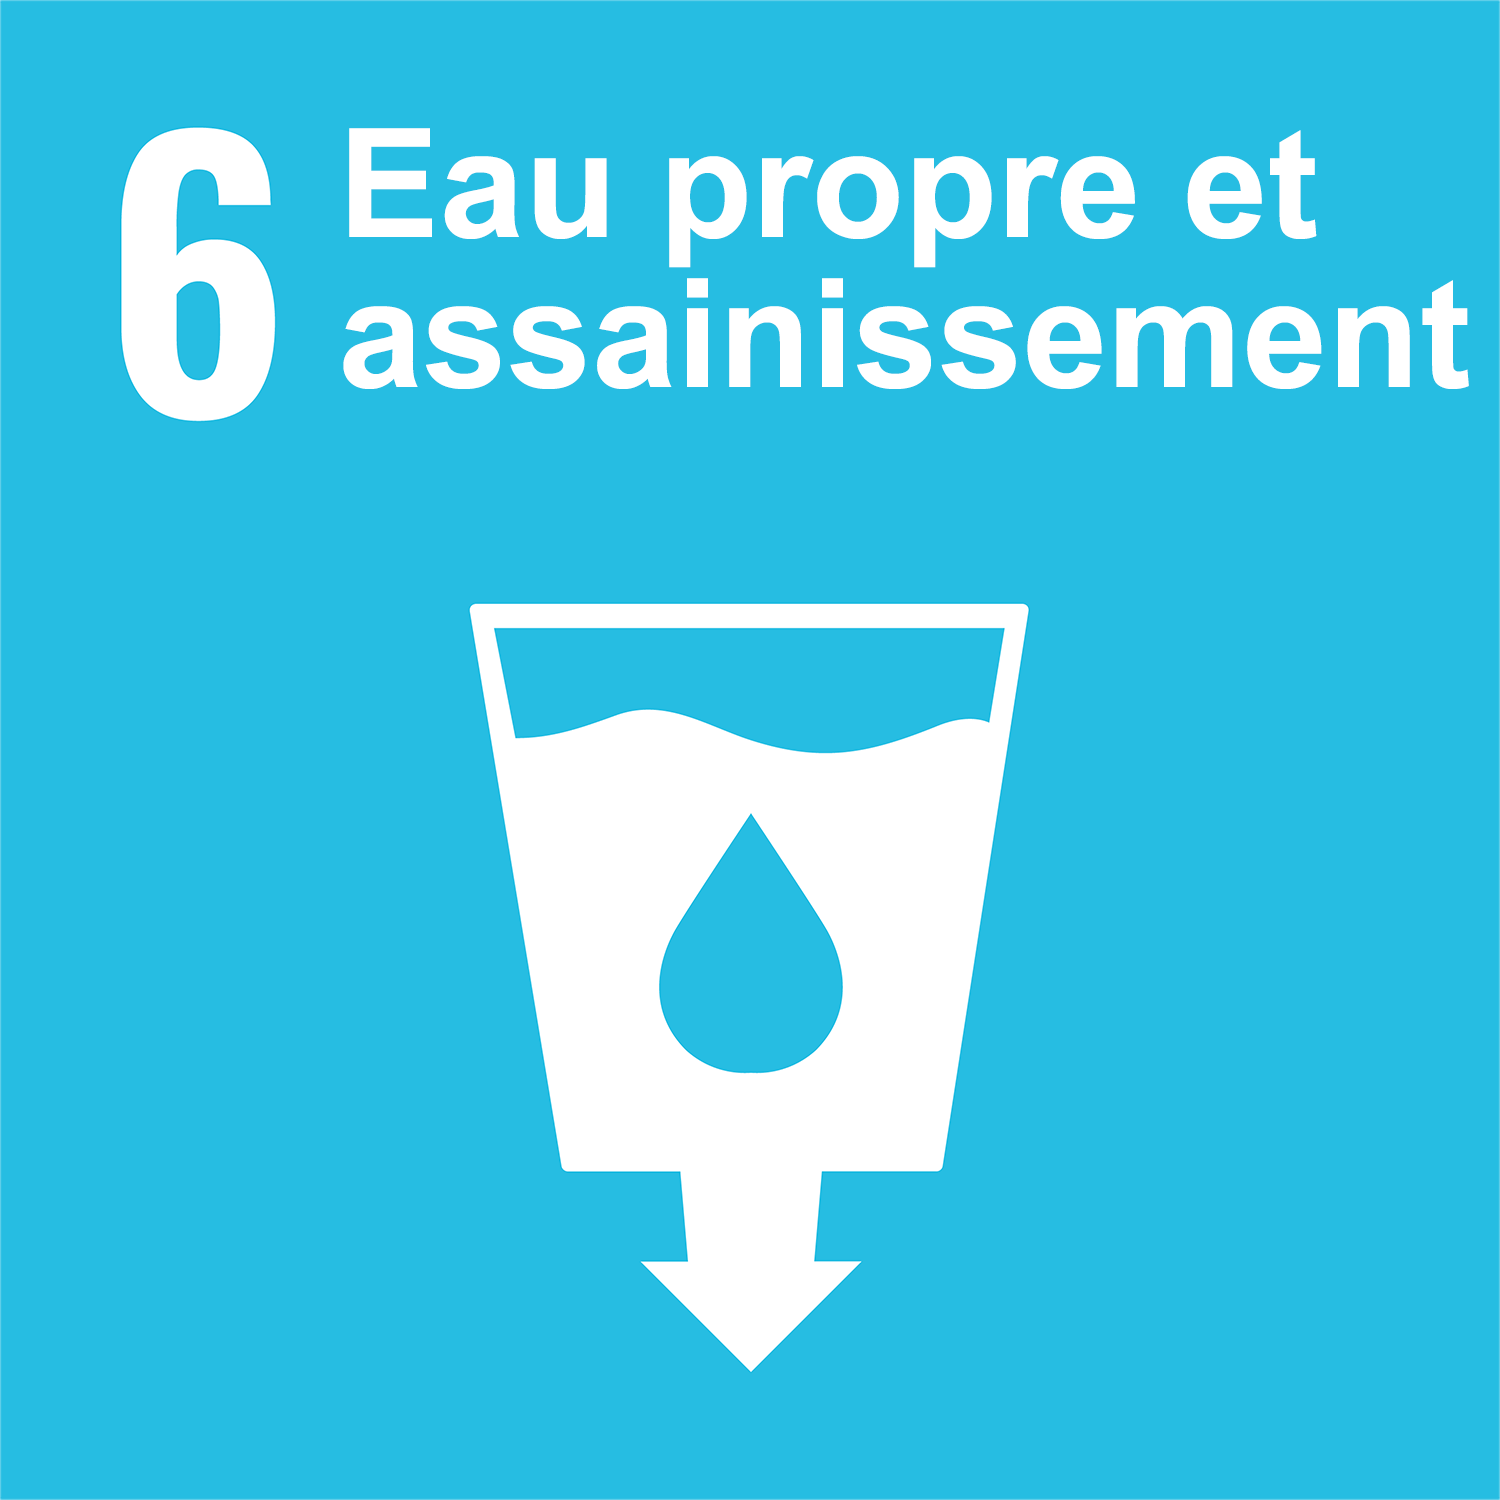 Goal 6: Clean water and sanitation